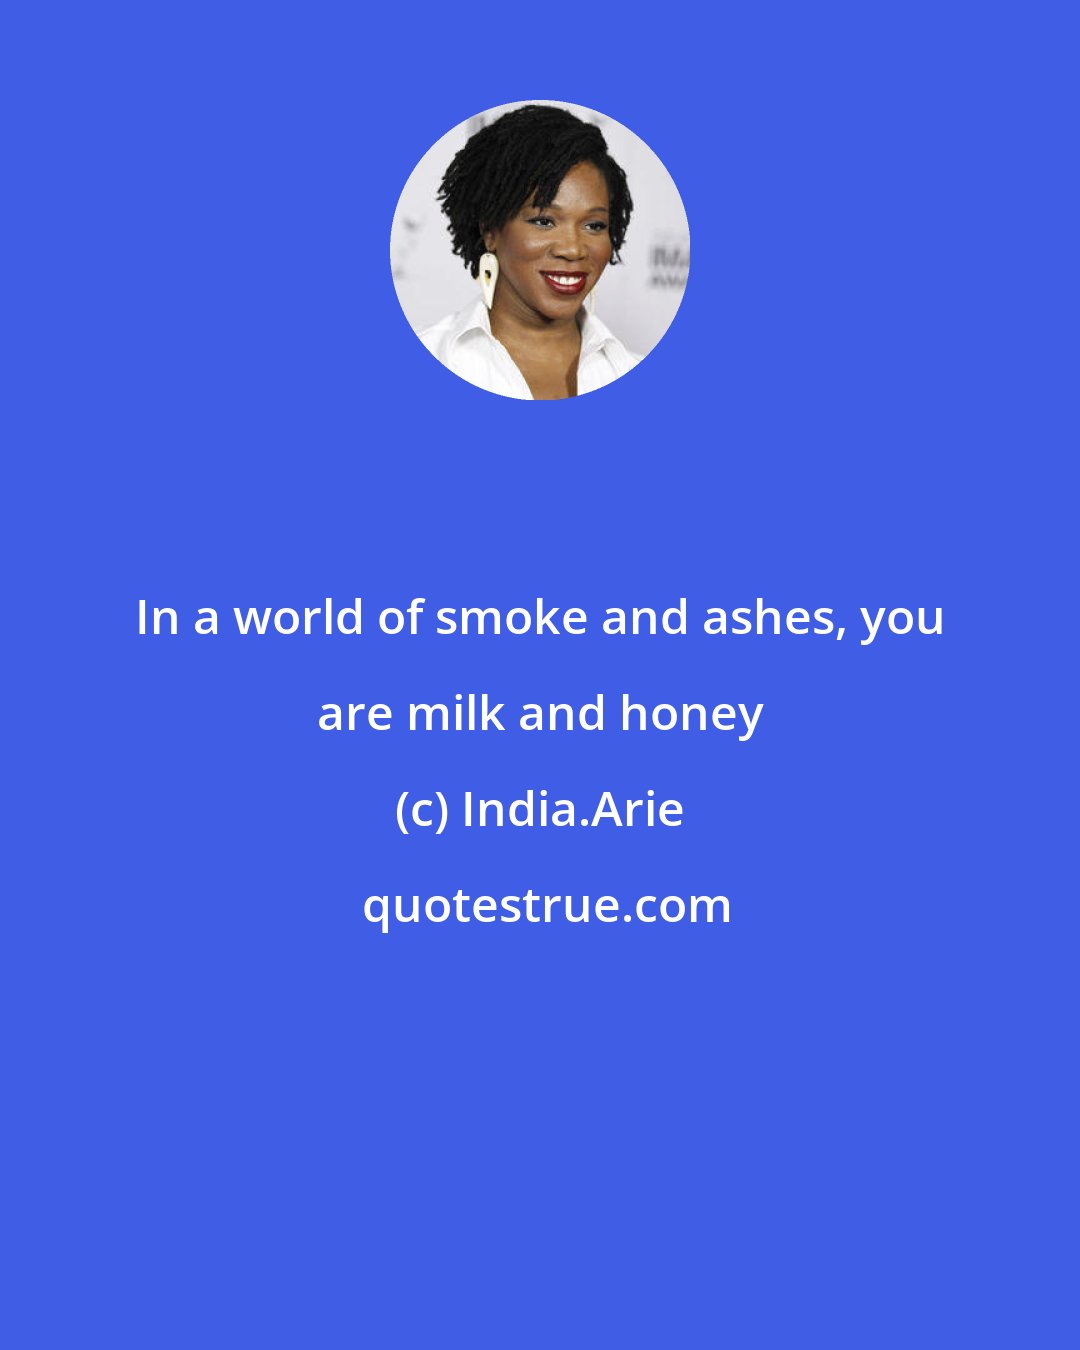 India.Arie: In a world of smoke and ashes, you are milk and honey